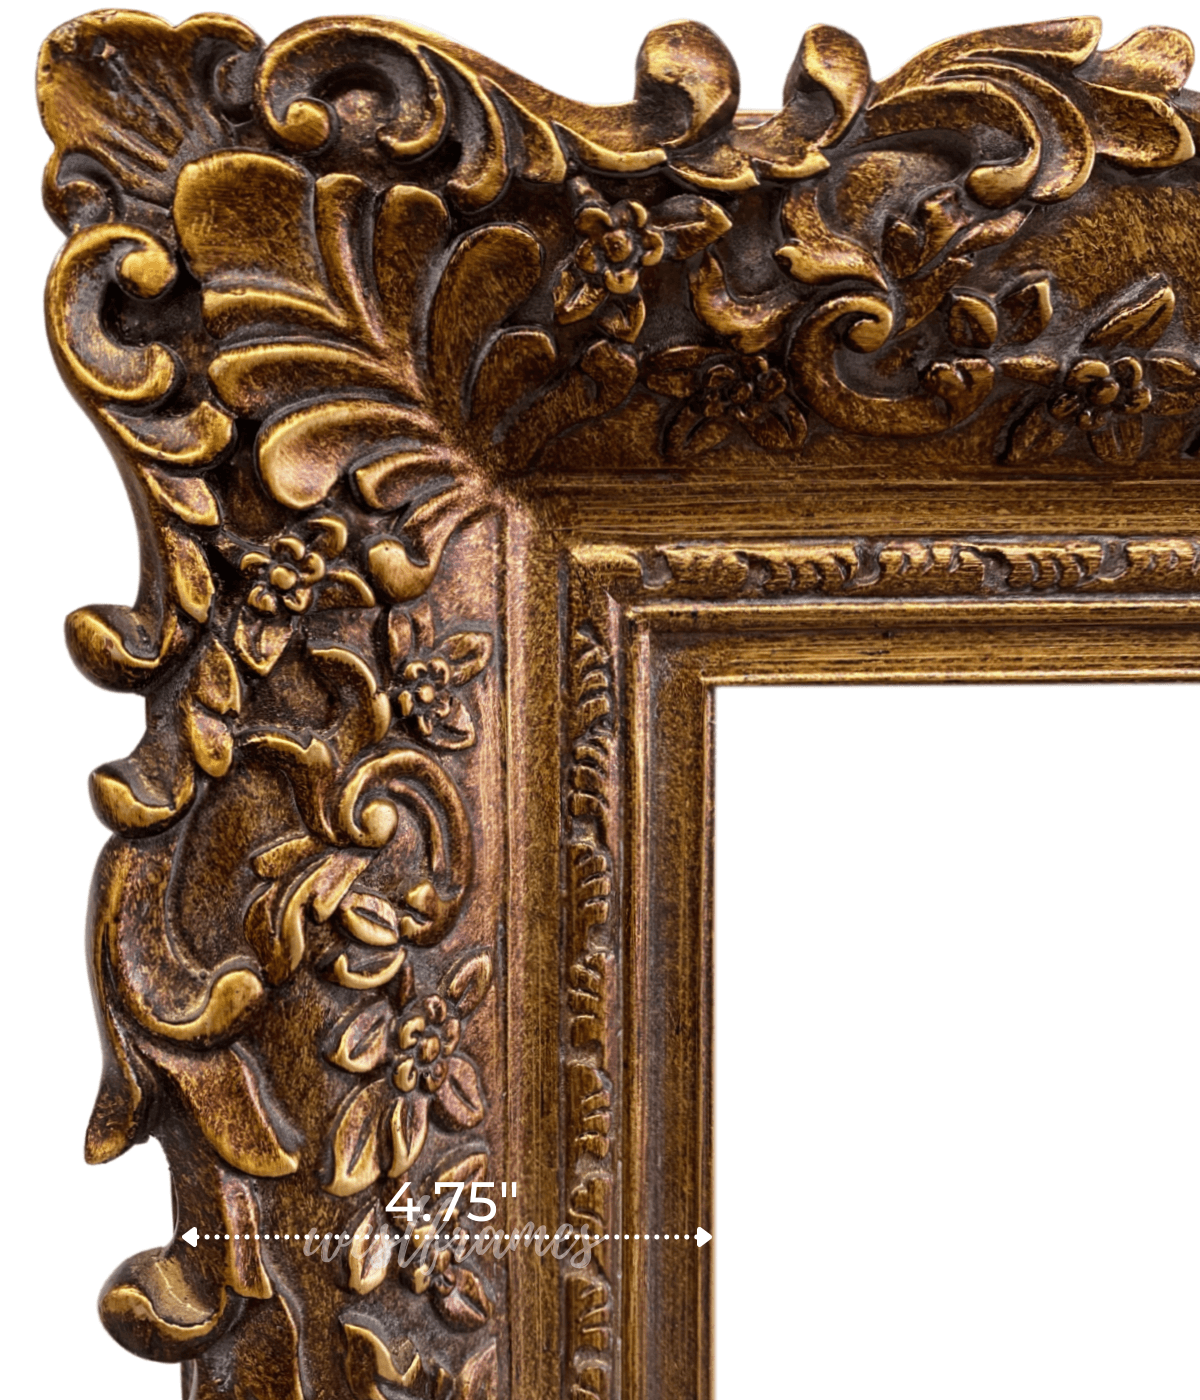 Louis French Baroque Rococo Ornate Wood Picture Frame Antique Gold Leaf 4.75" Wide - West Frames